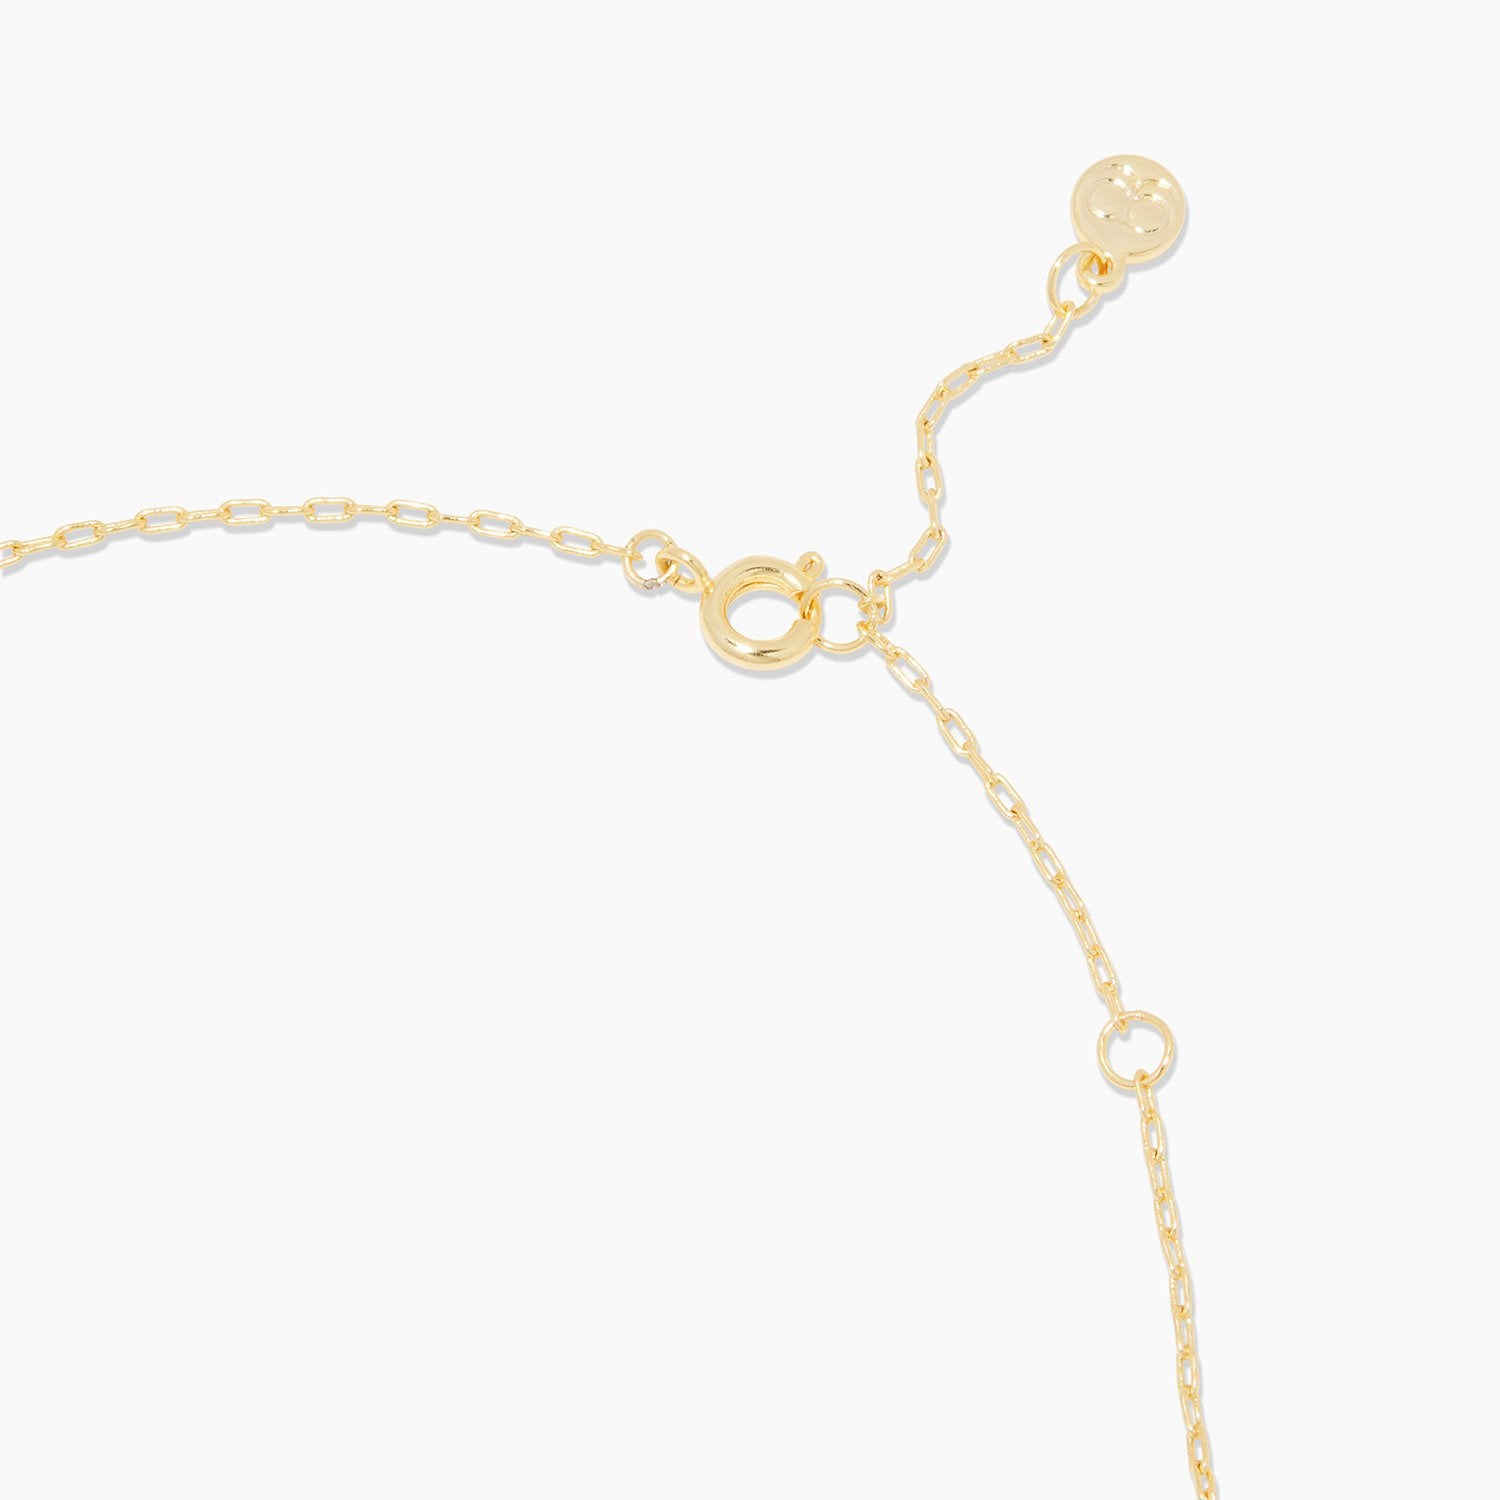 Brooks charm necklace - gold